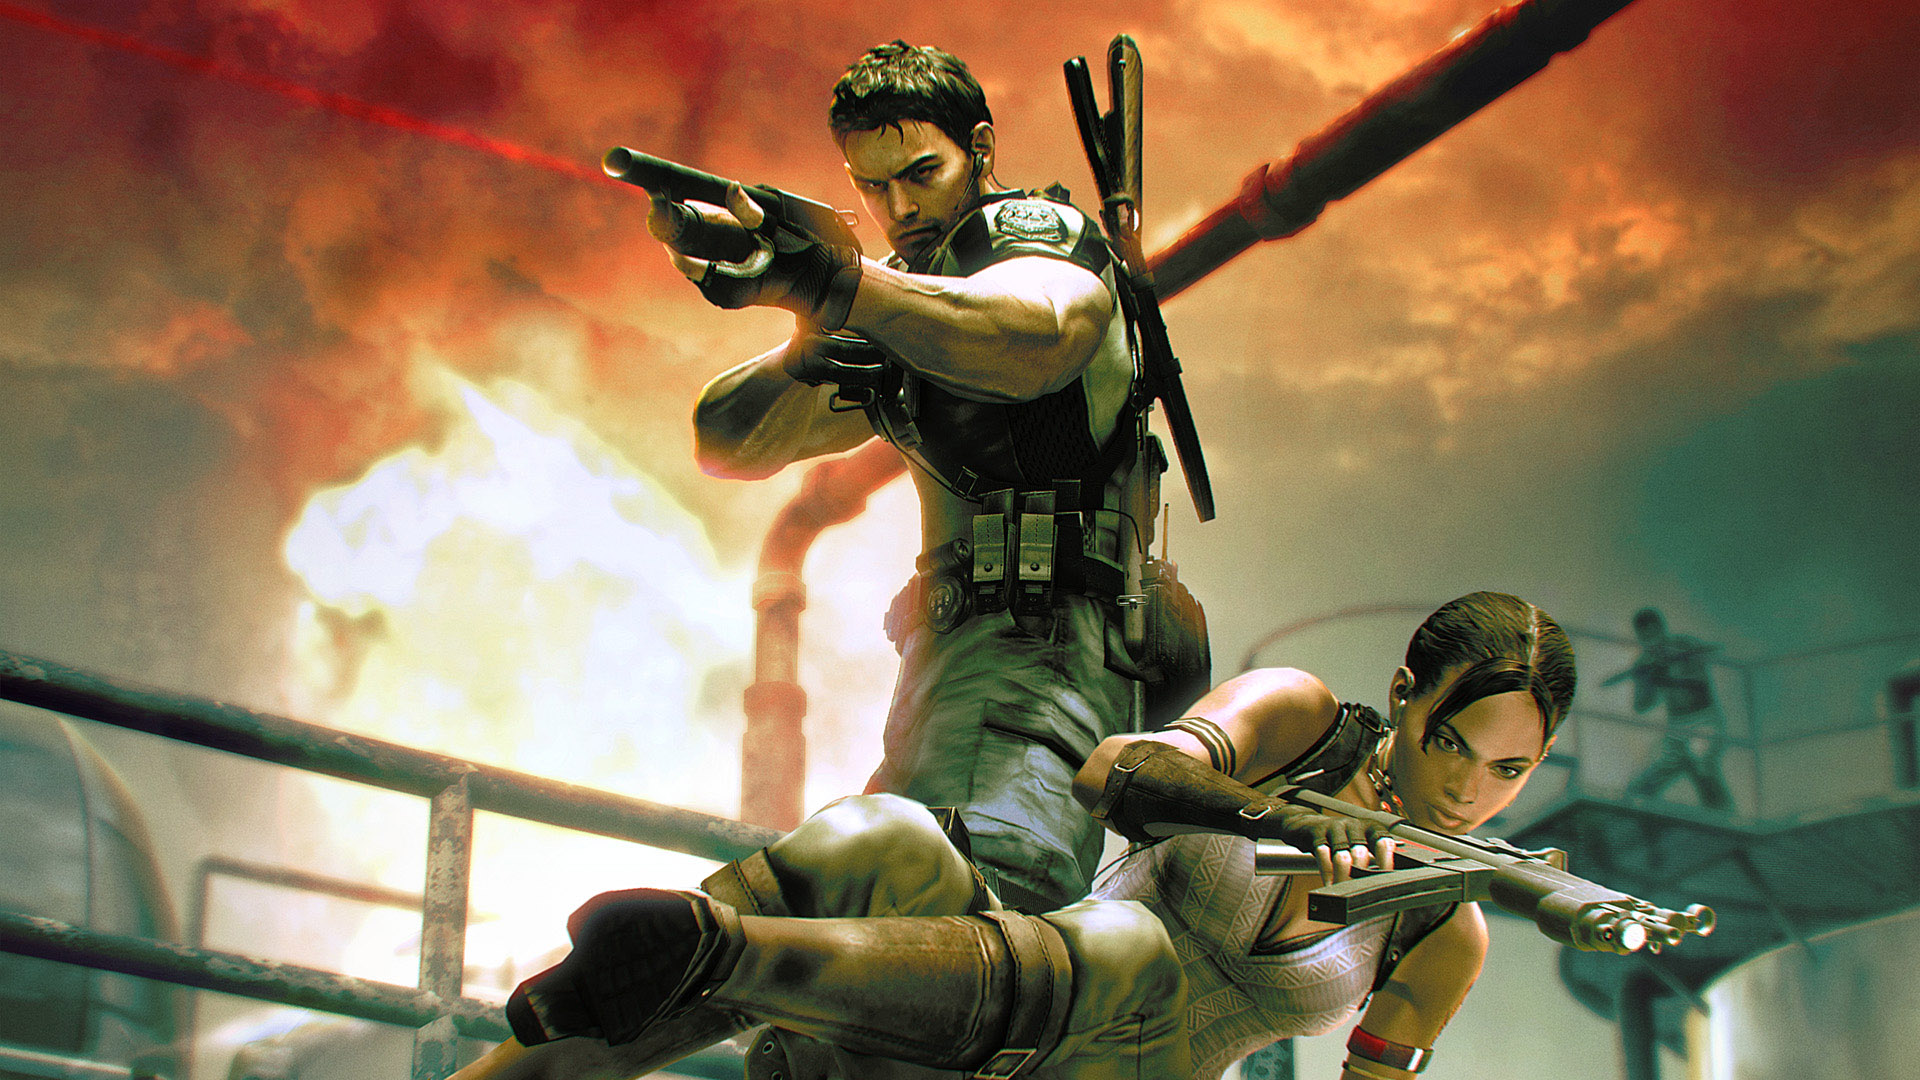 Resident Evil 5 characters wallpapers and images ...